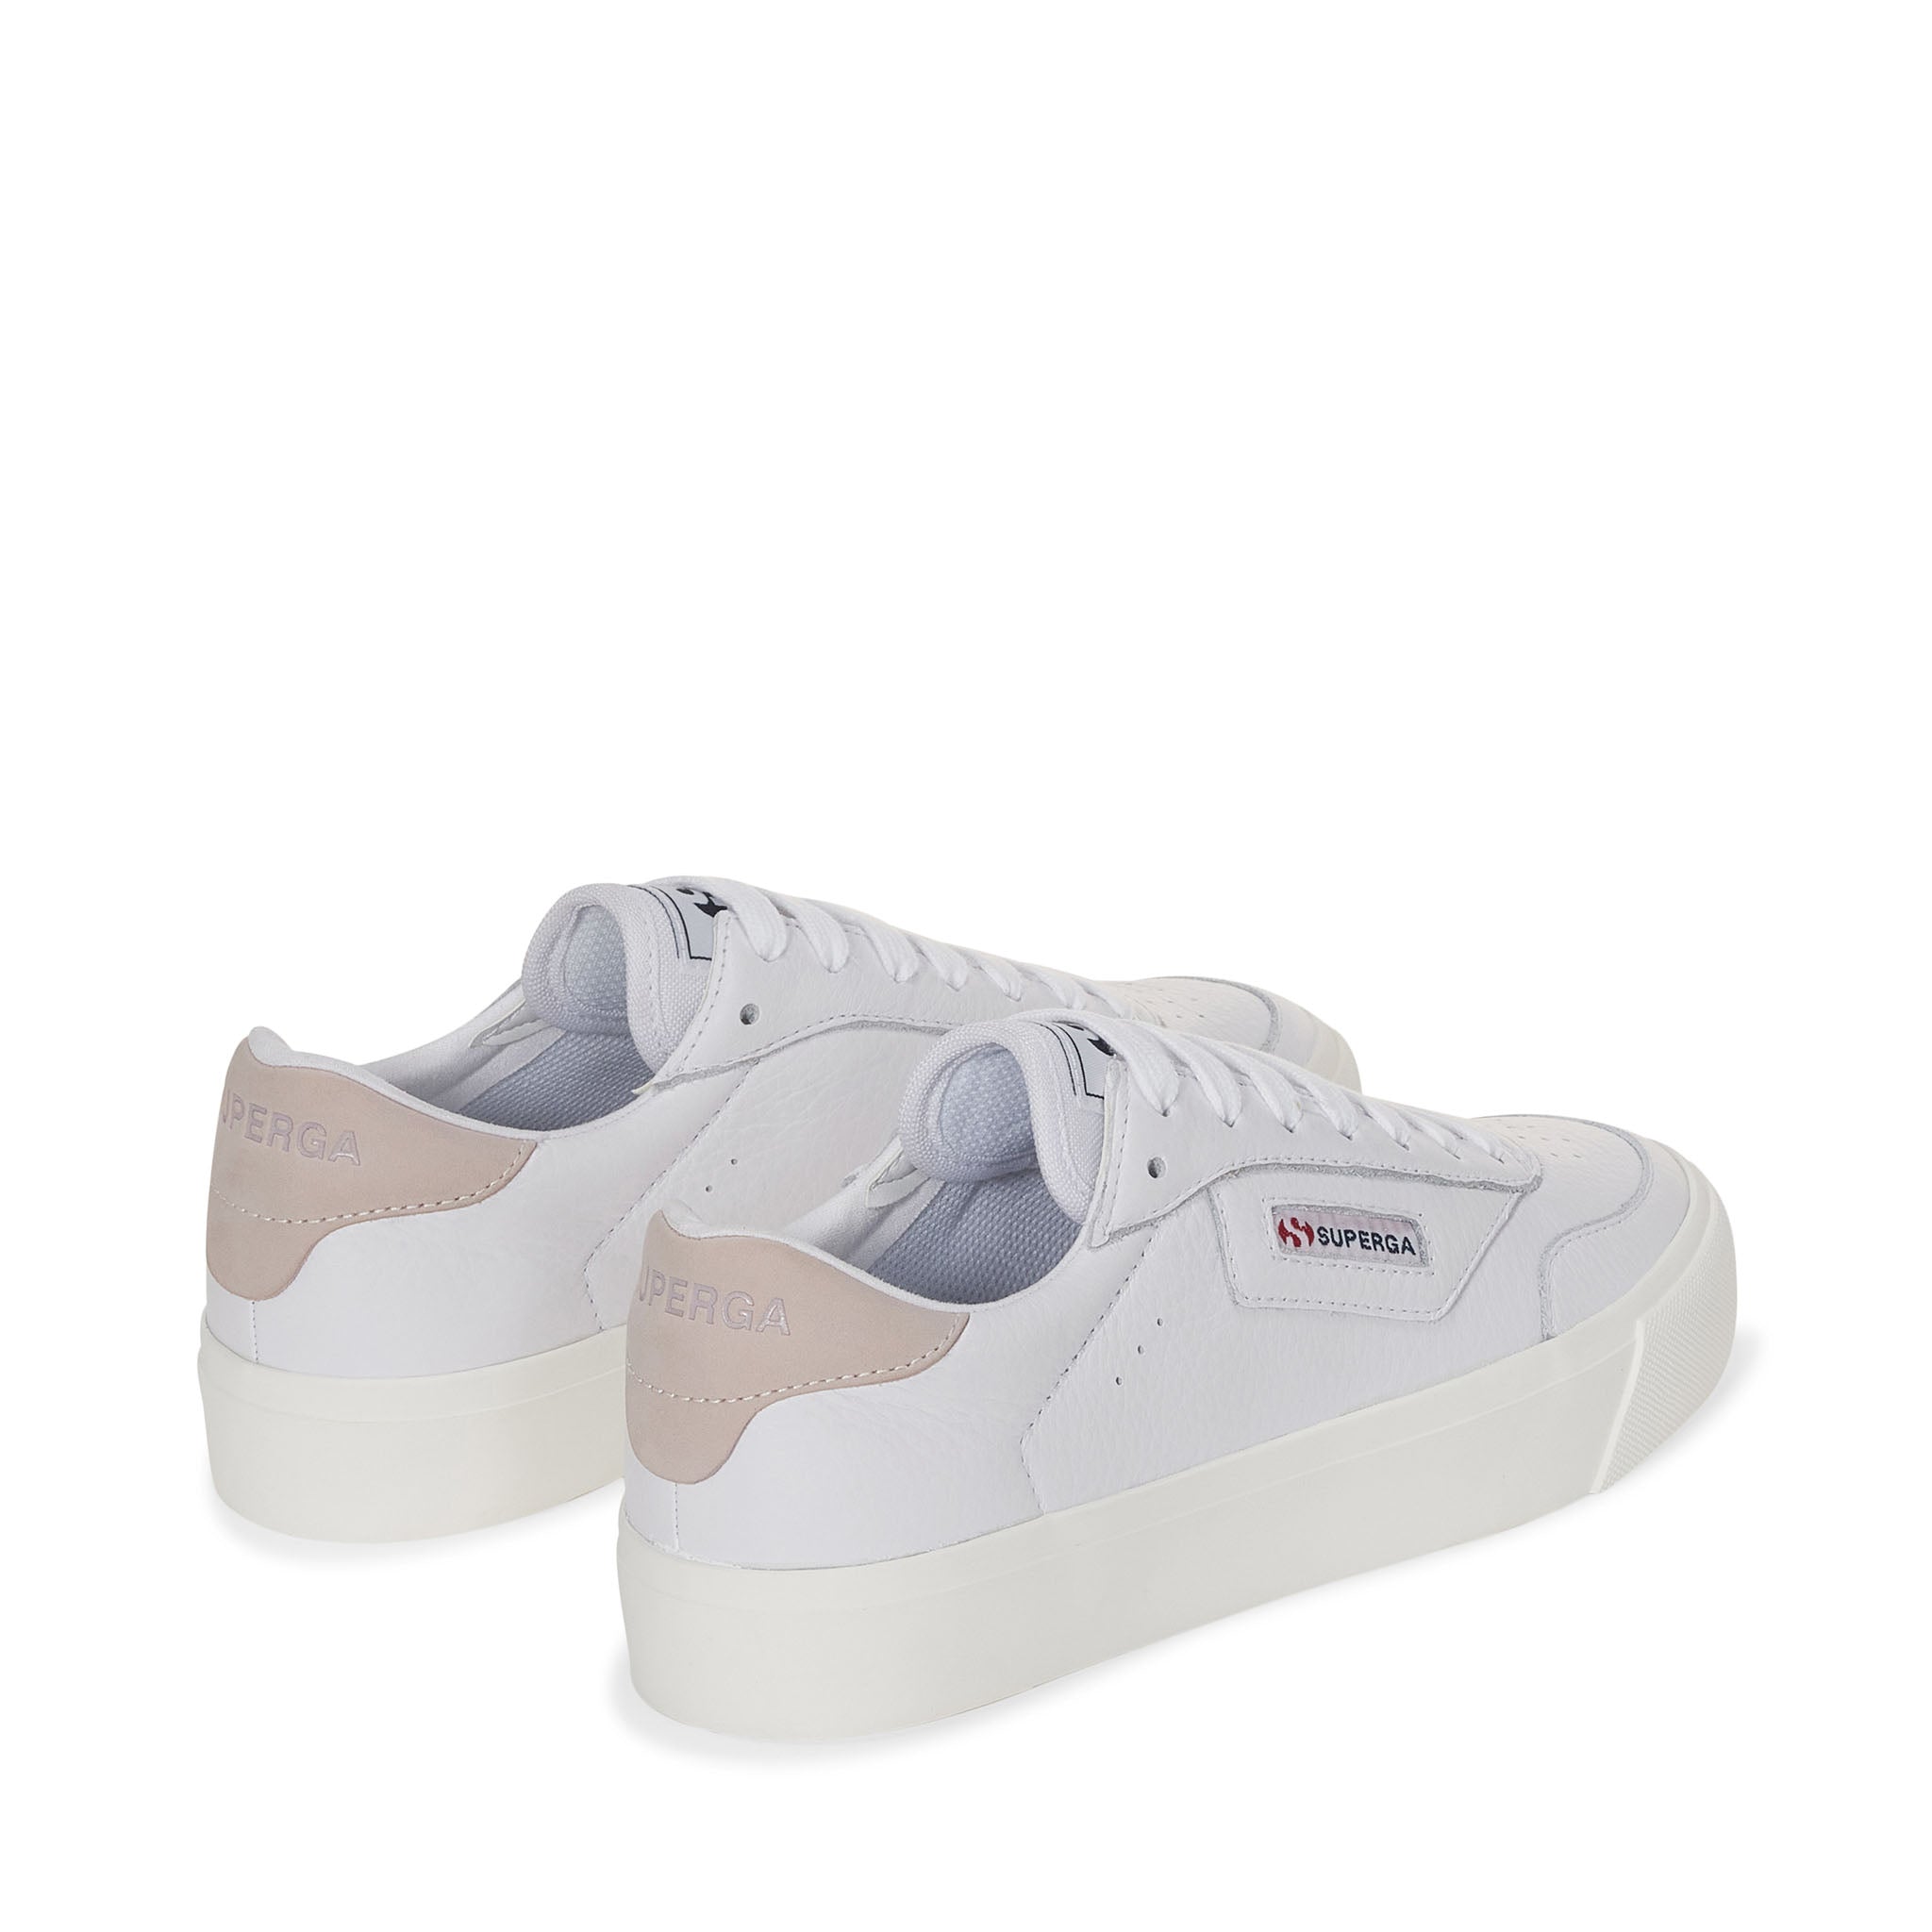 Superga 3843 Court Sneakers - White Violet Hushed Avorio. Back view.